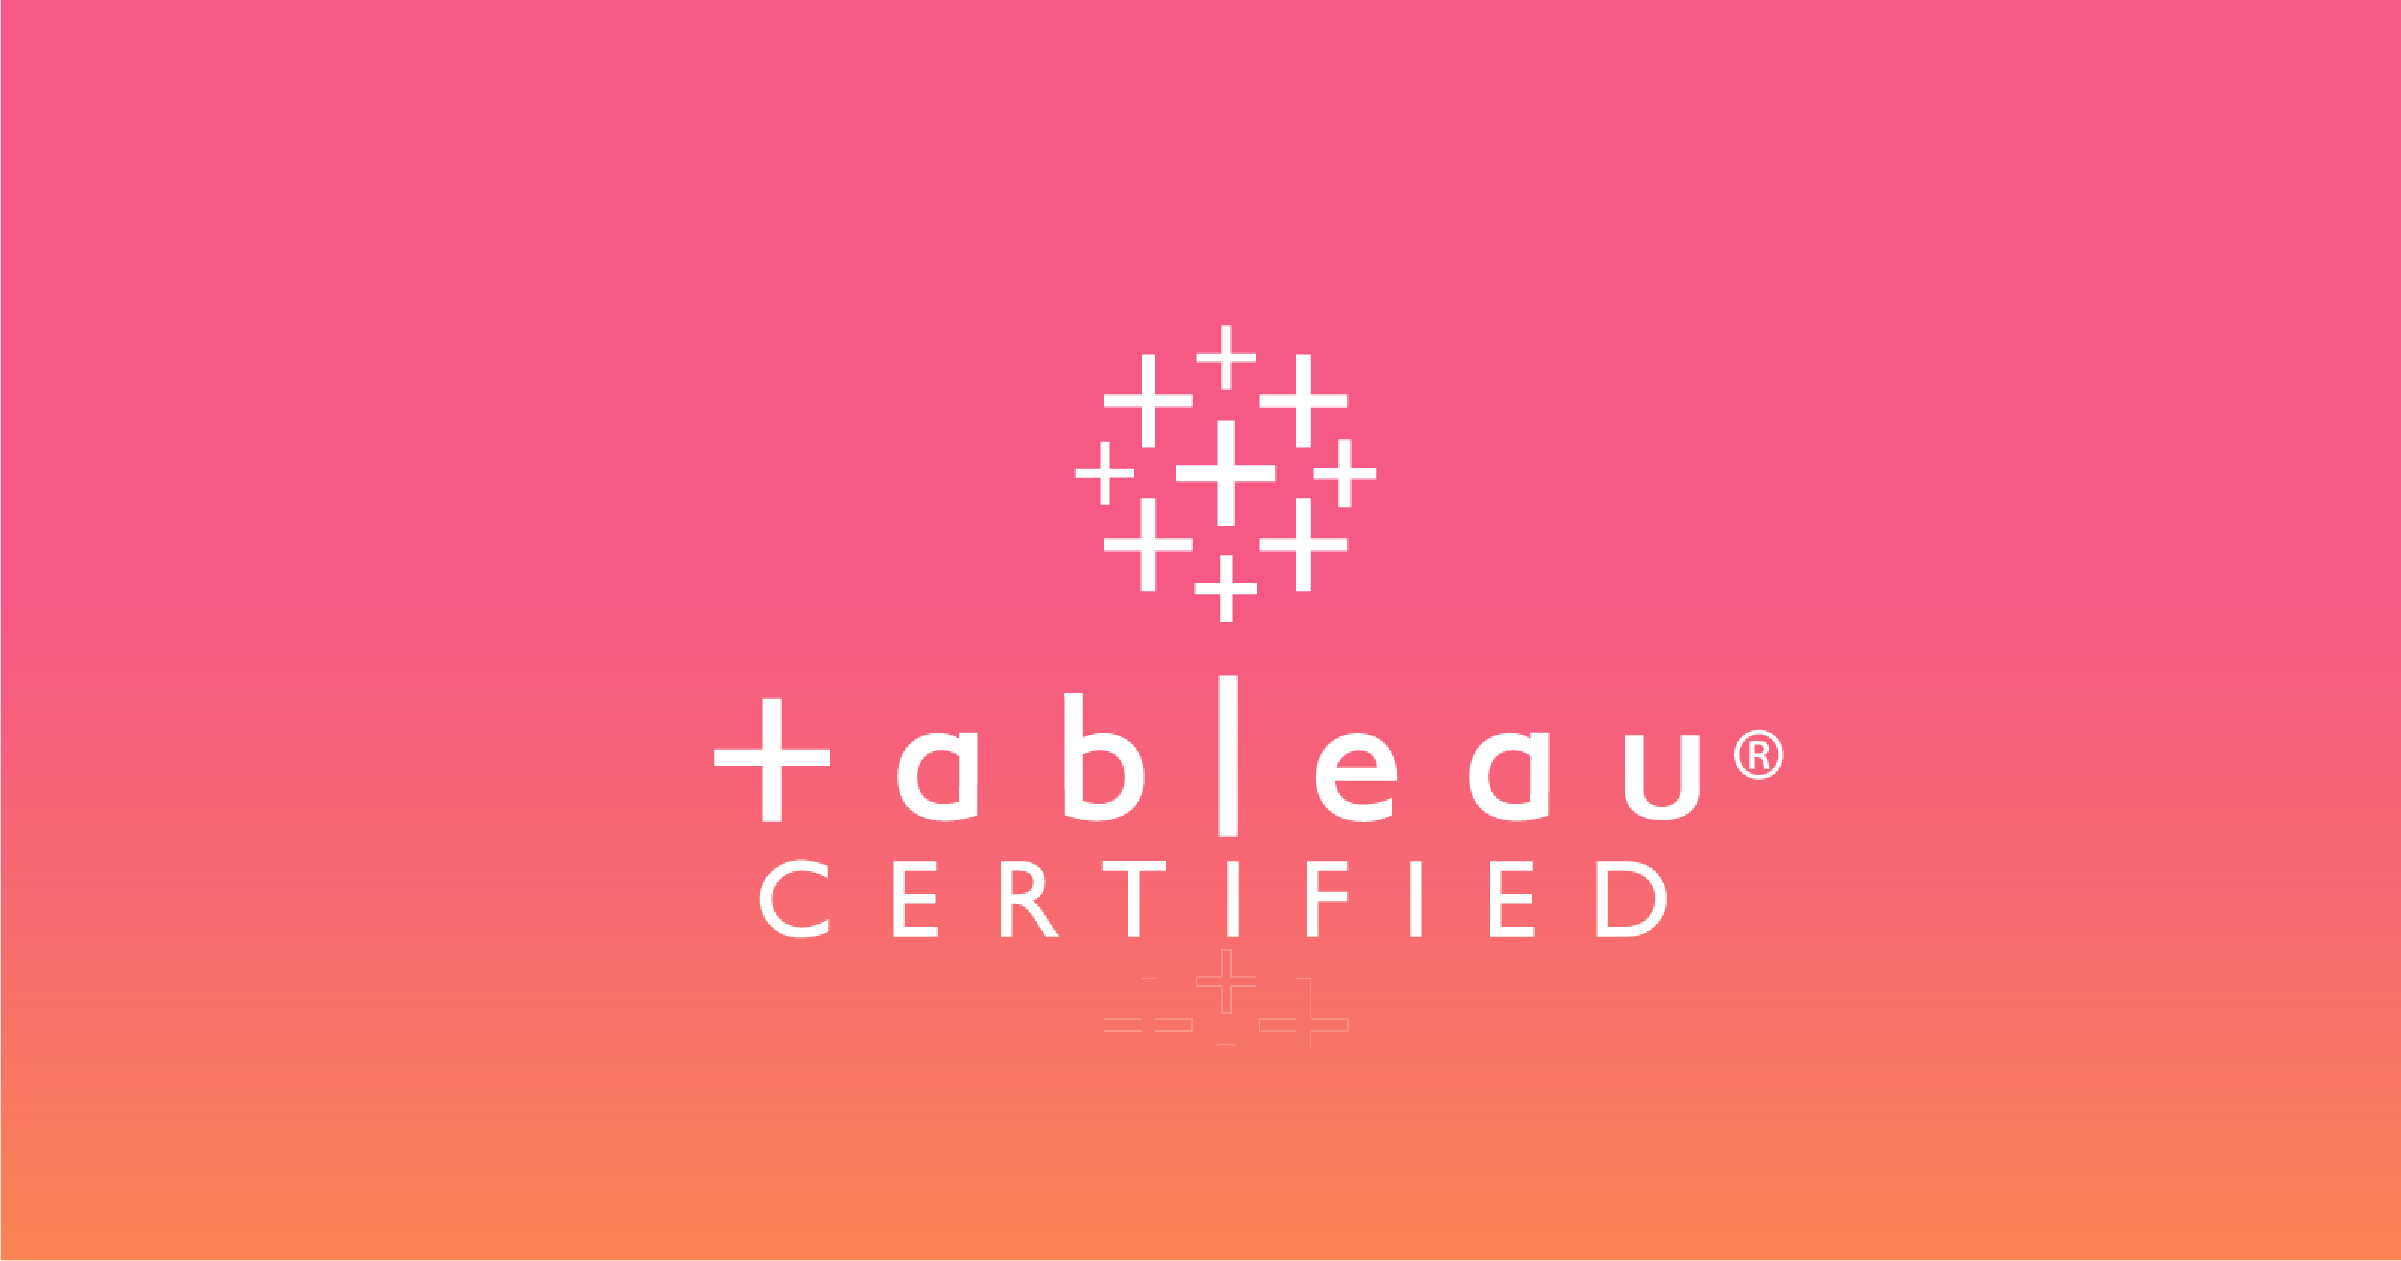 How Do I Get Certified in Tableau?